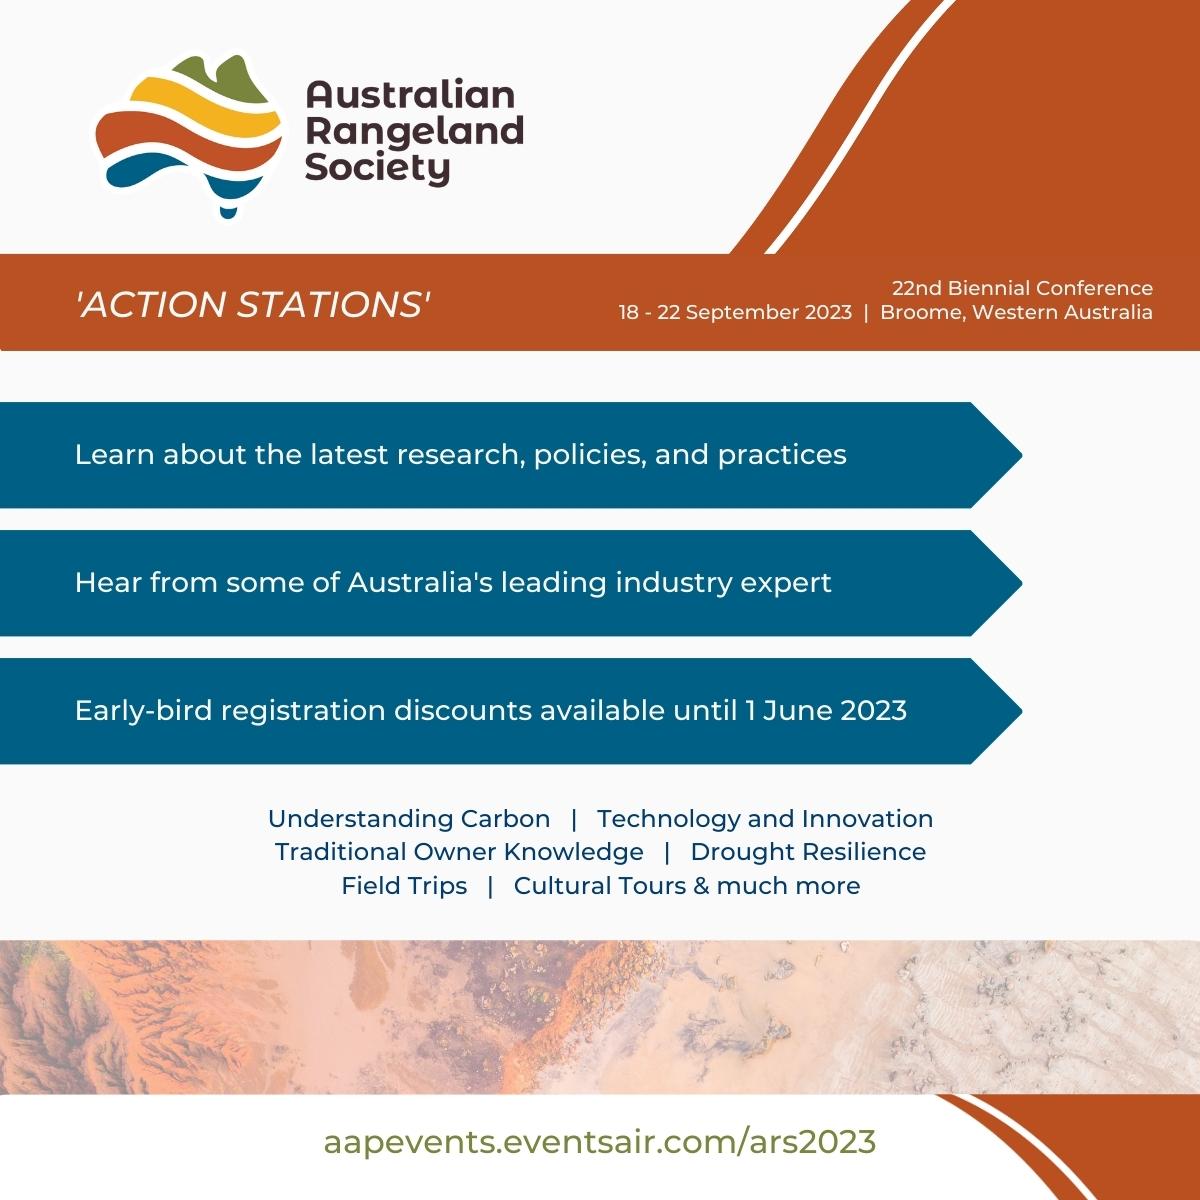 Flyer for Action Stations event run by Australian Rangelands Society